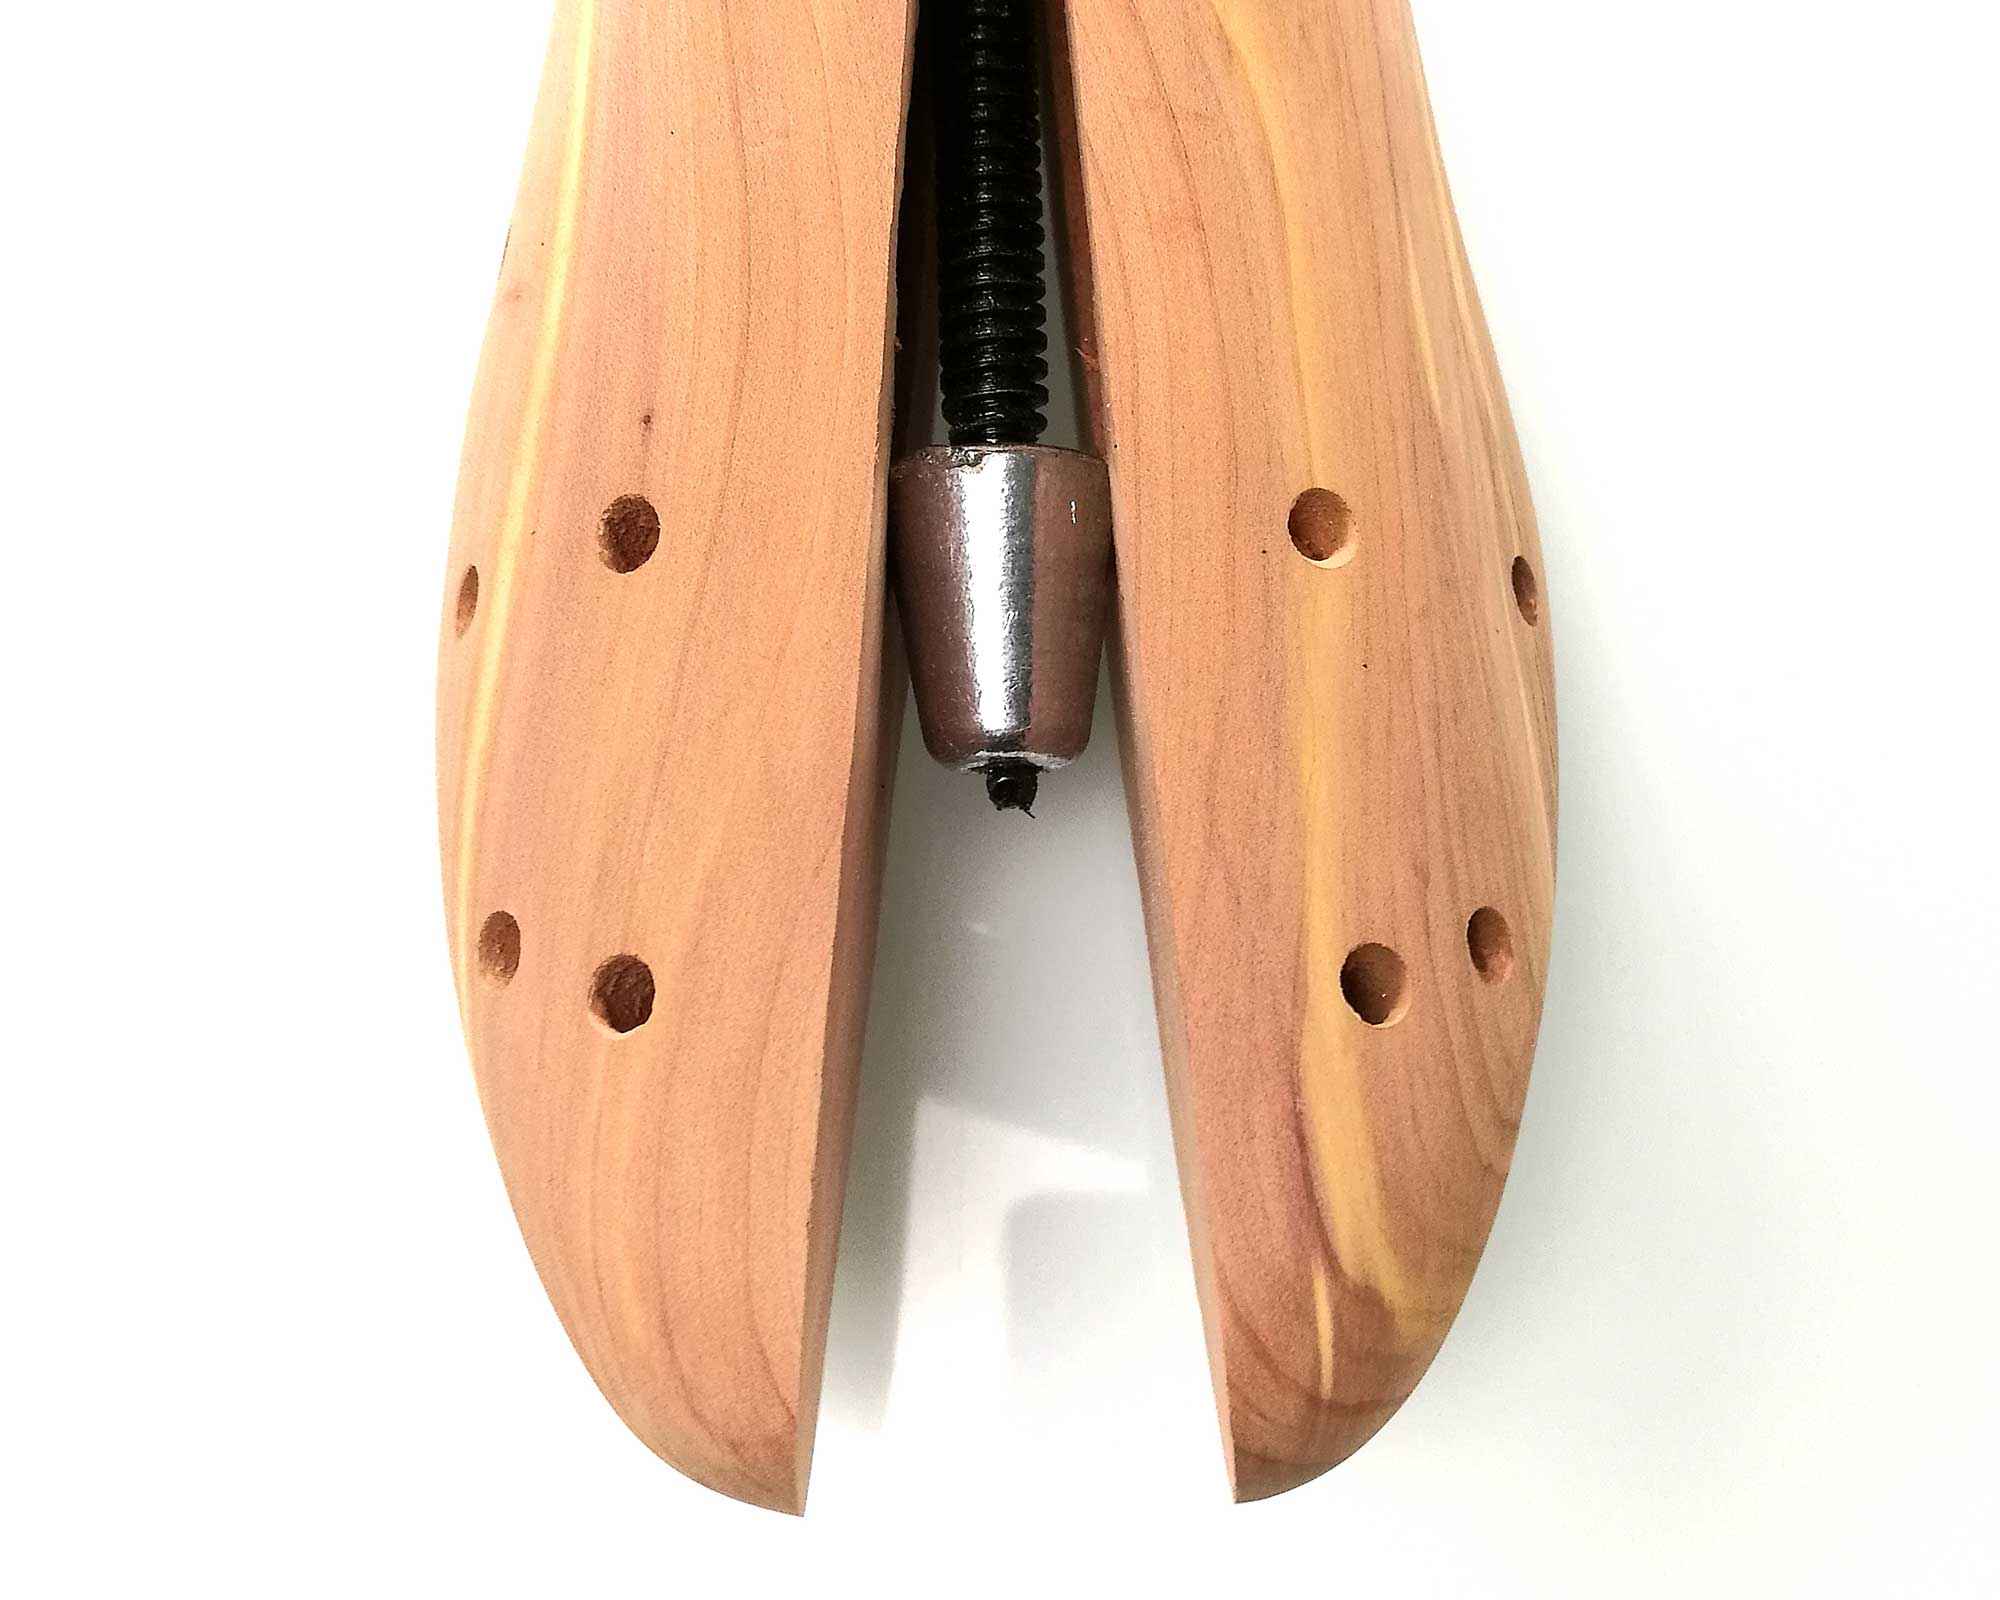 Womens Deluxe Professional Strong Beech Wood Shoe Stretcher for UK Sizes 4-9 narrow to wide 